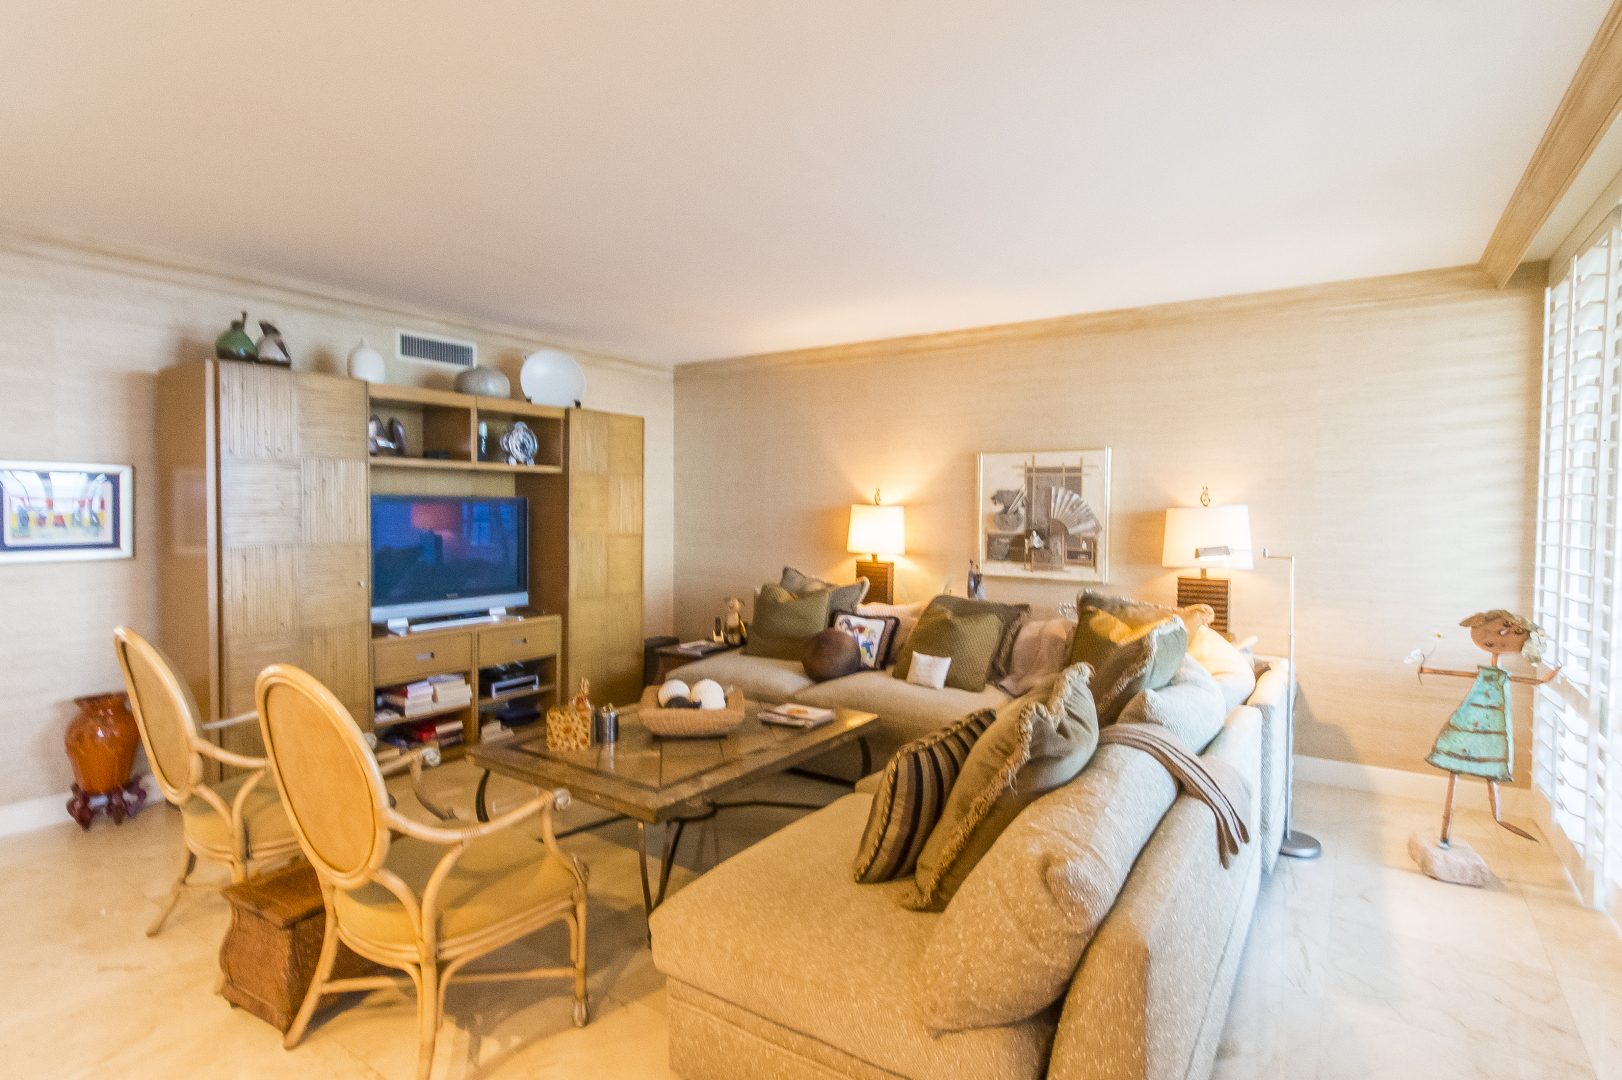 Residence 9D, Tower 1 at The Palms, Luxury Oceanfront Condominiums Fort Lauderdale, Florida 33305